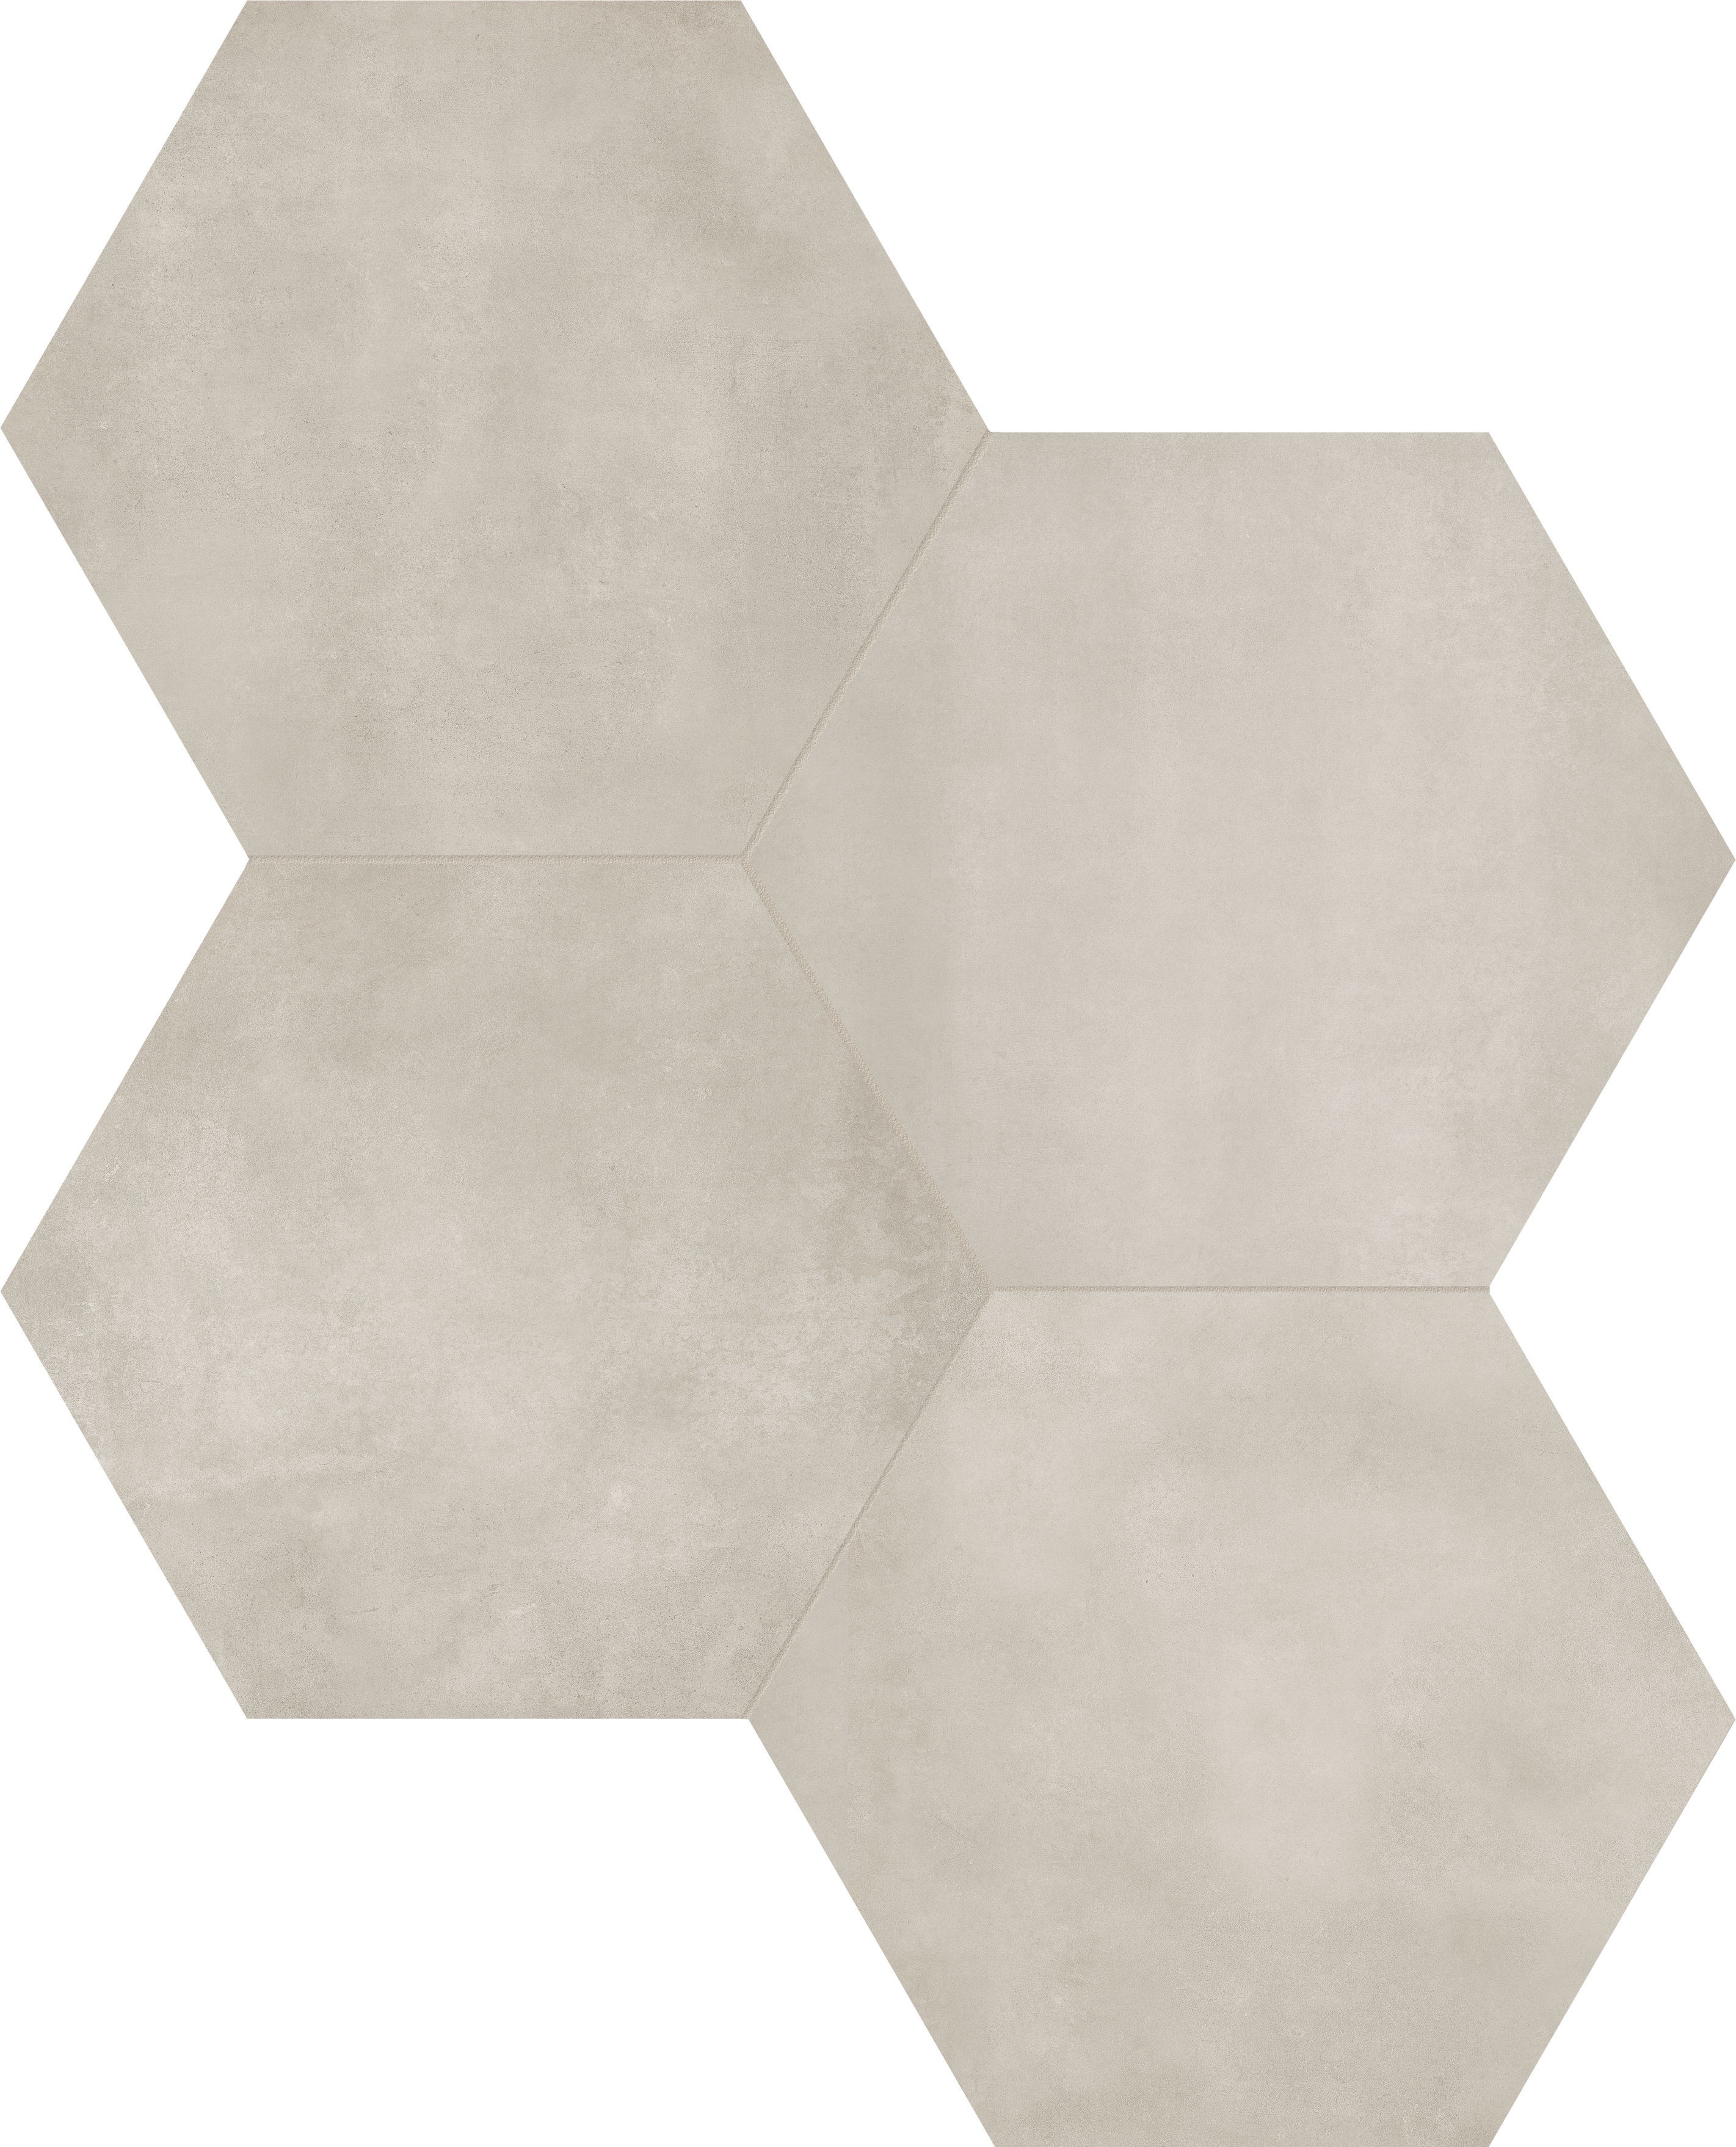 sand pattern glazed porcelain field tile from form anatolia collection distributed by surface group international matte finish pressed edge 7-inch hexagon shape